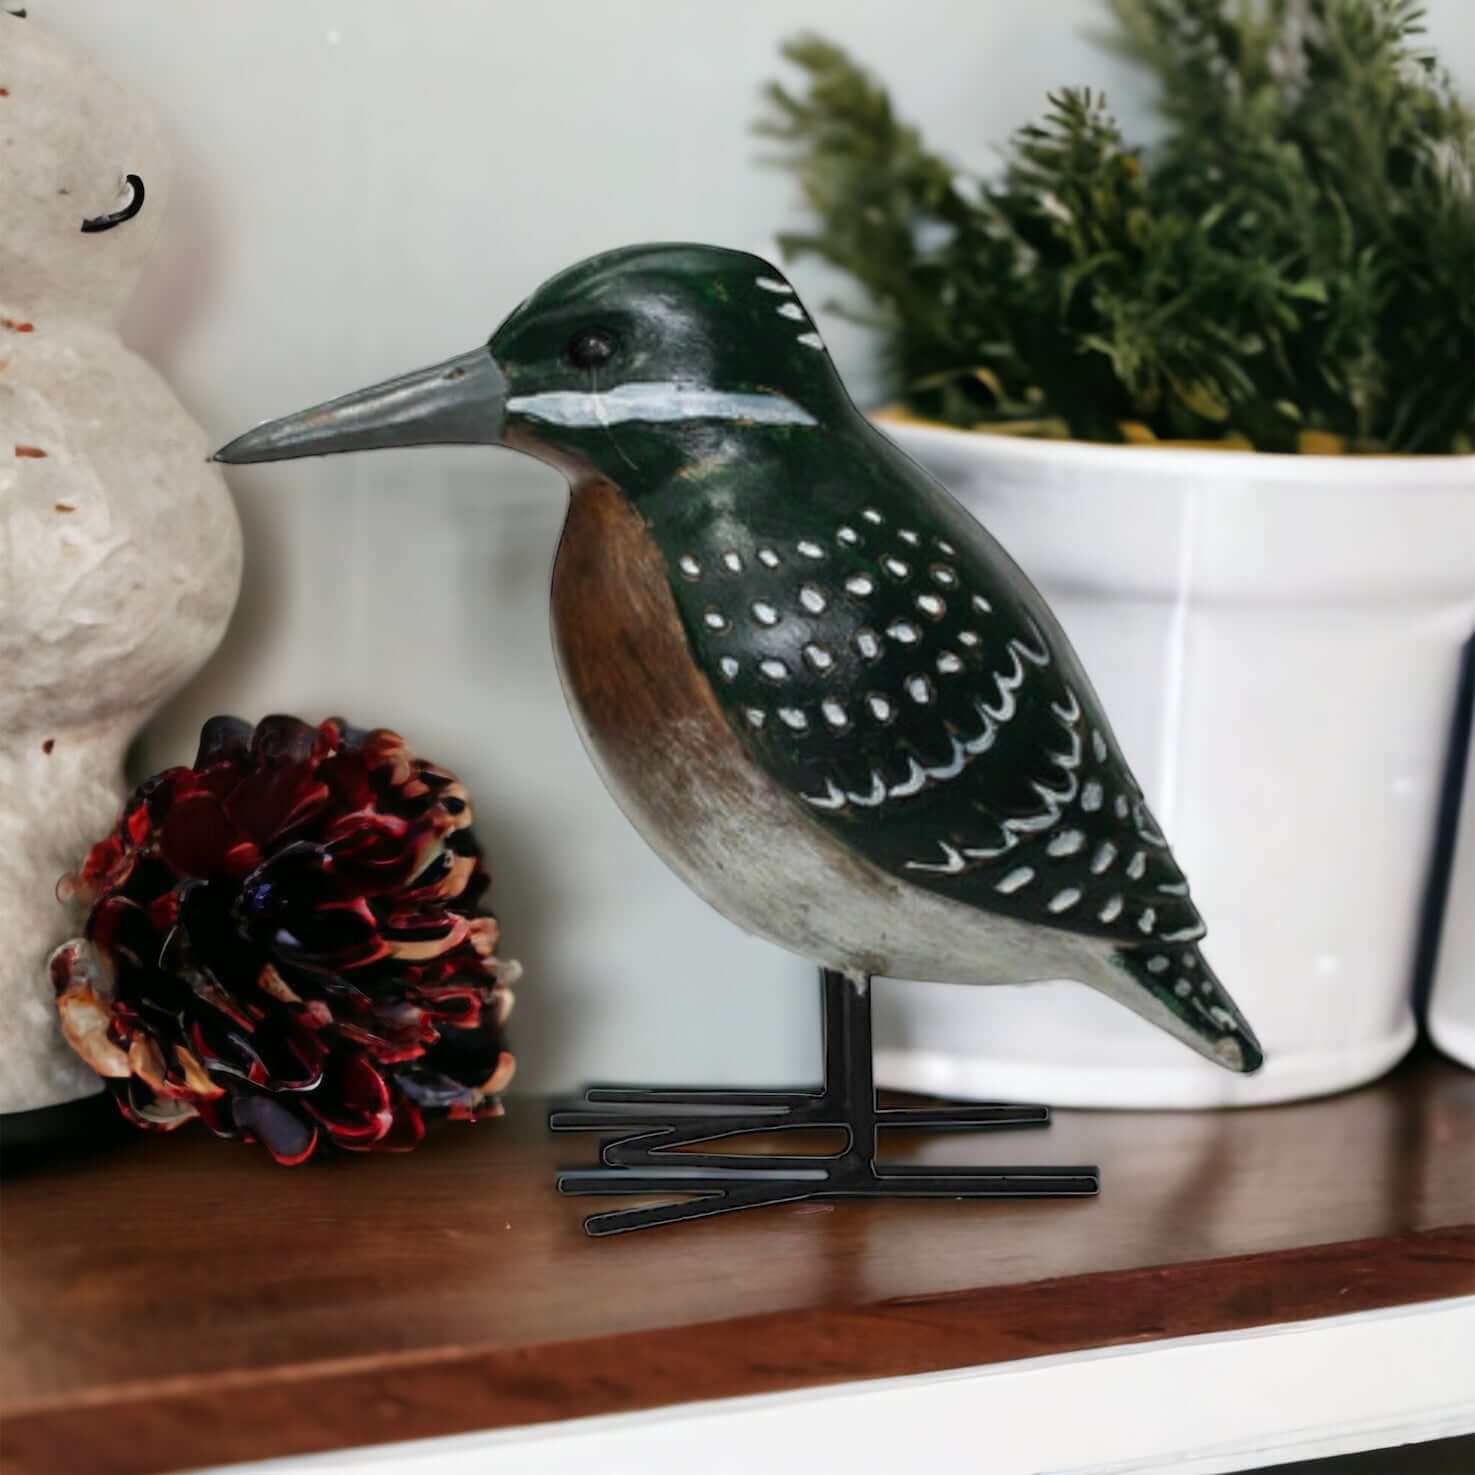 Bird Kingfisher King Natural Ornament - The Renmy Store Homewares & Gifts 